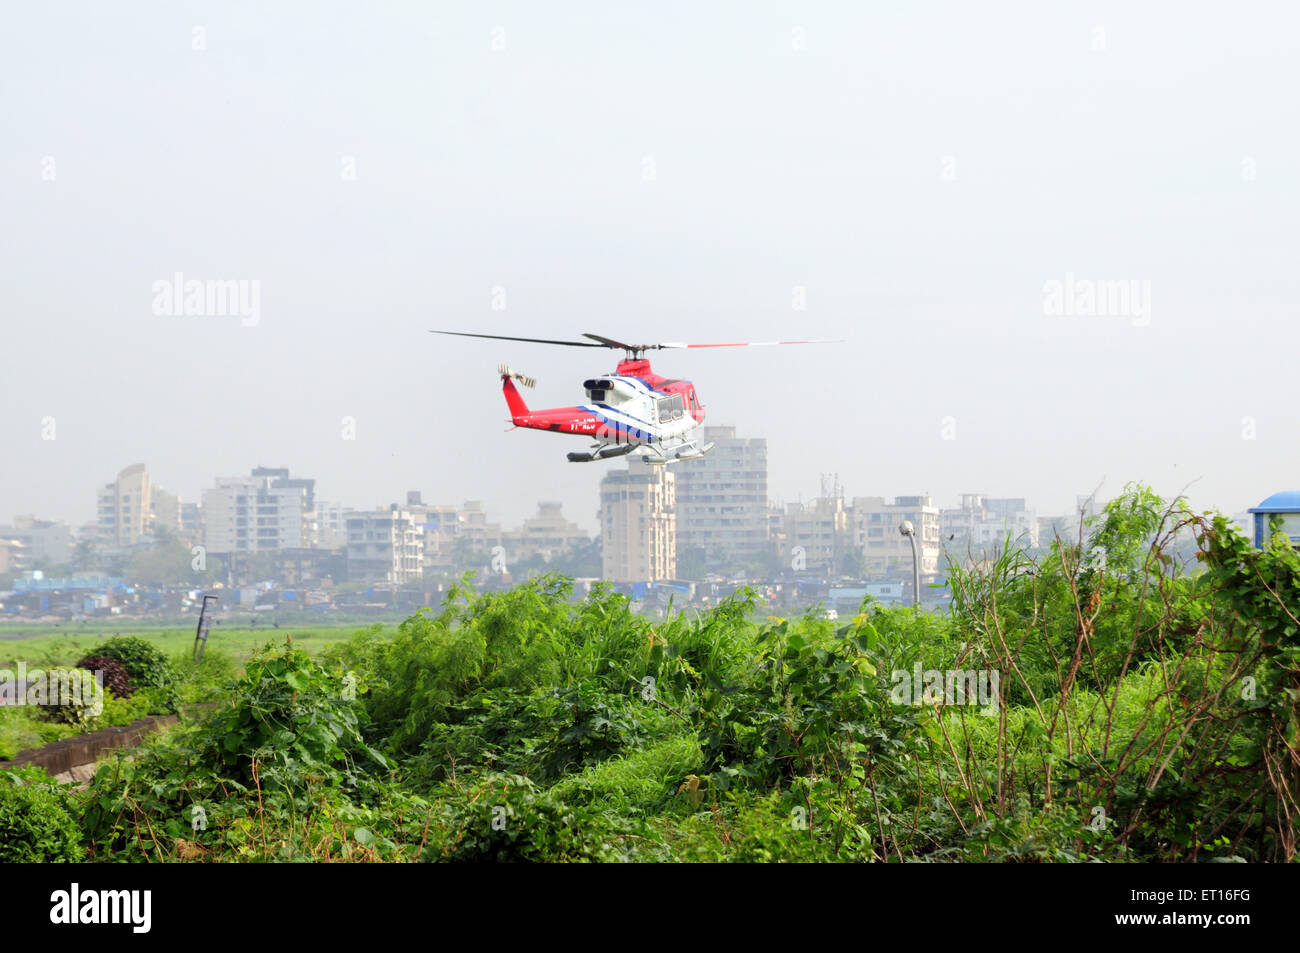 Helicopter taking off Stock Photo